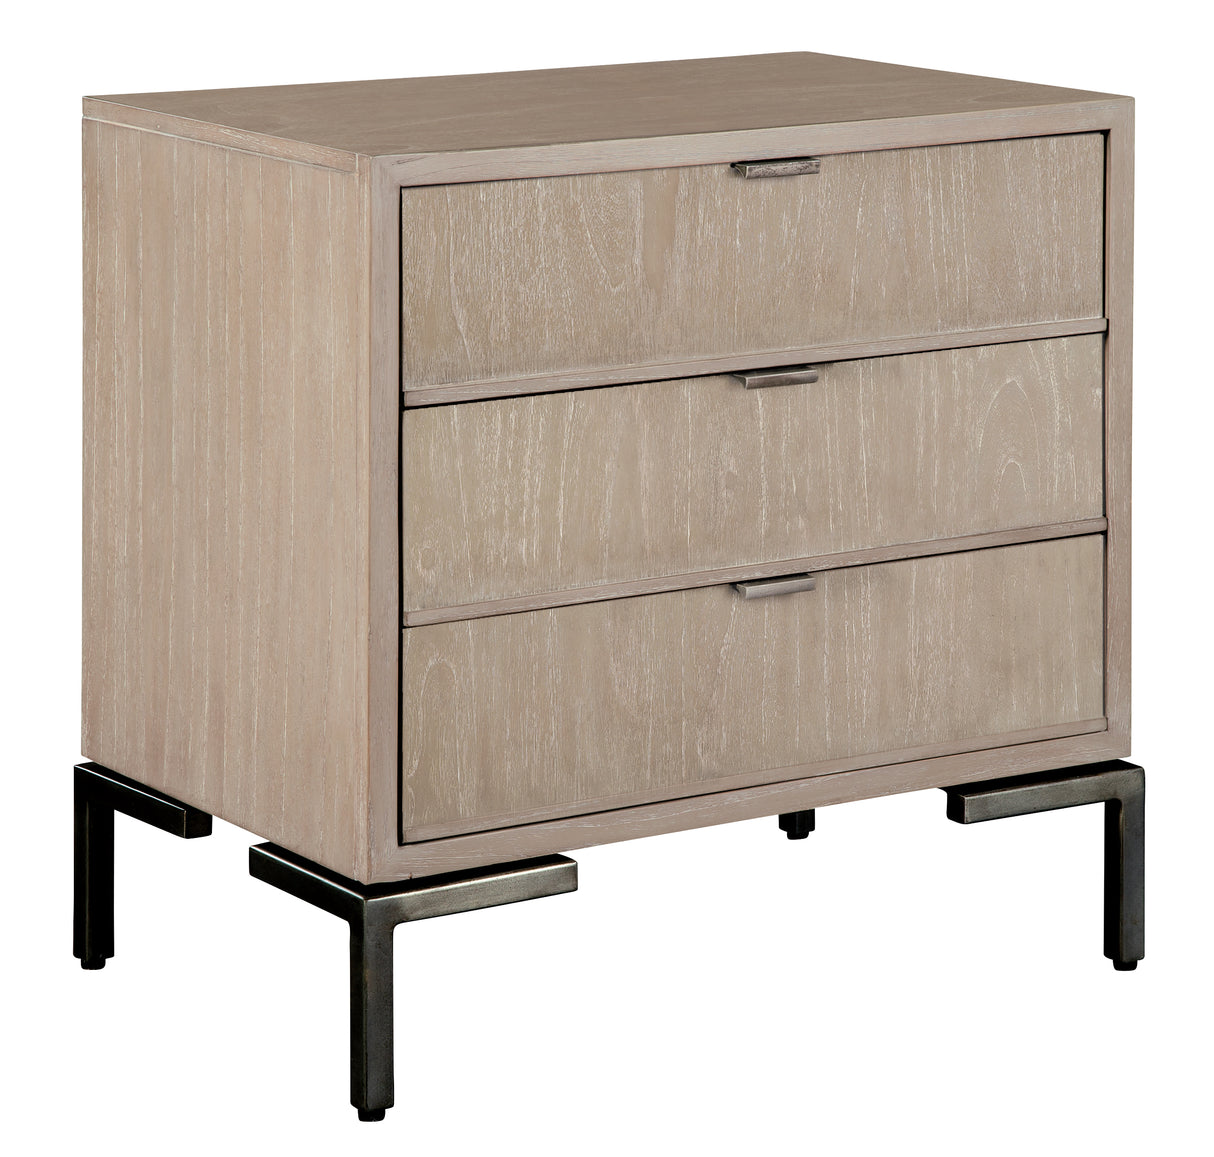 Hekman 25362 Scottsdale 28in. x 19.25in. x 28in. Three Drawer Night Stand